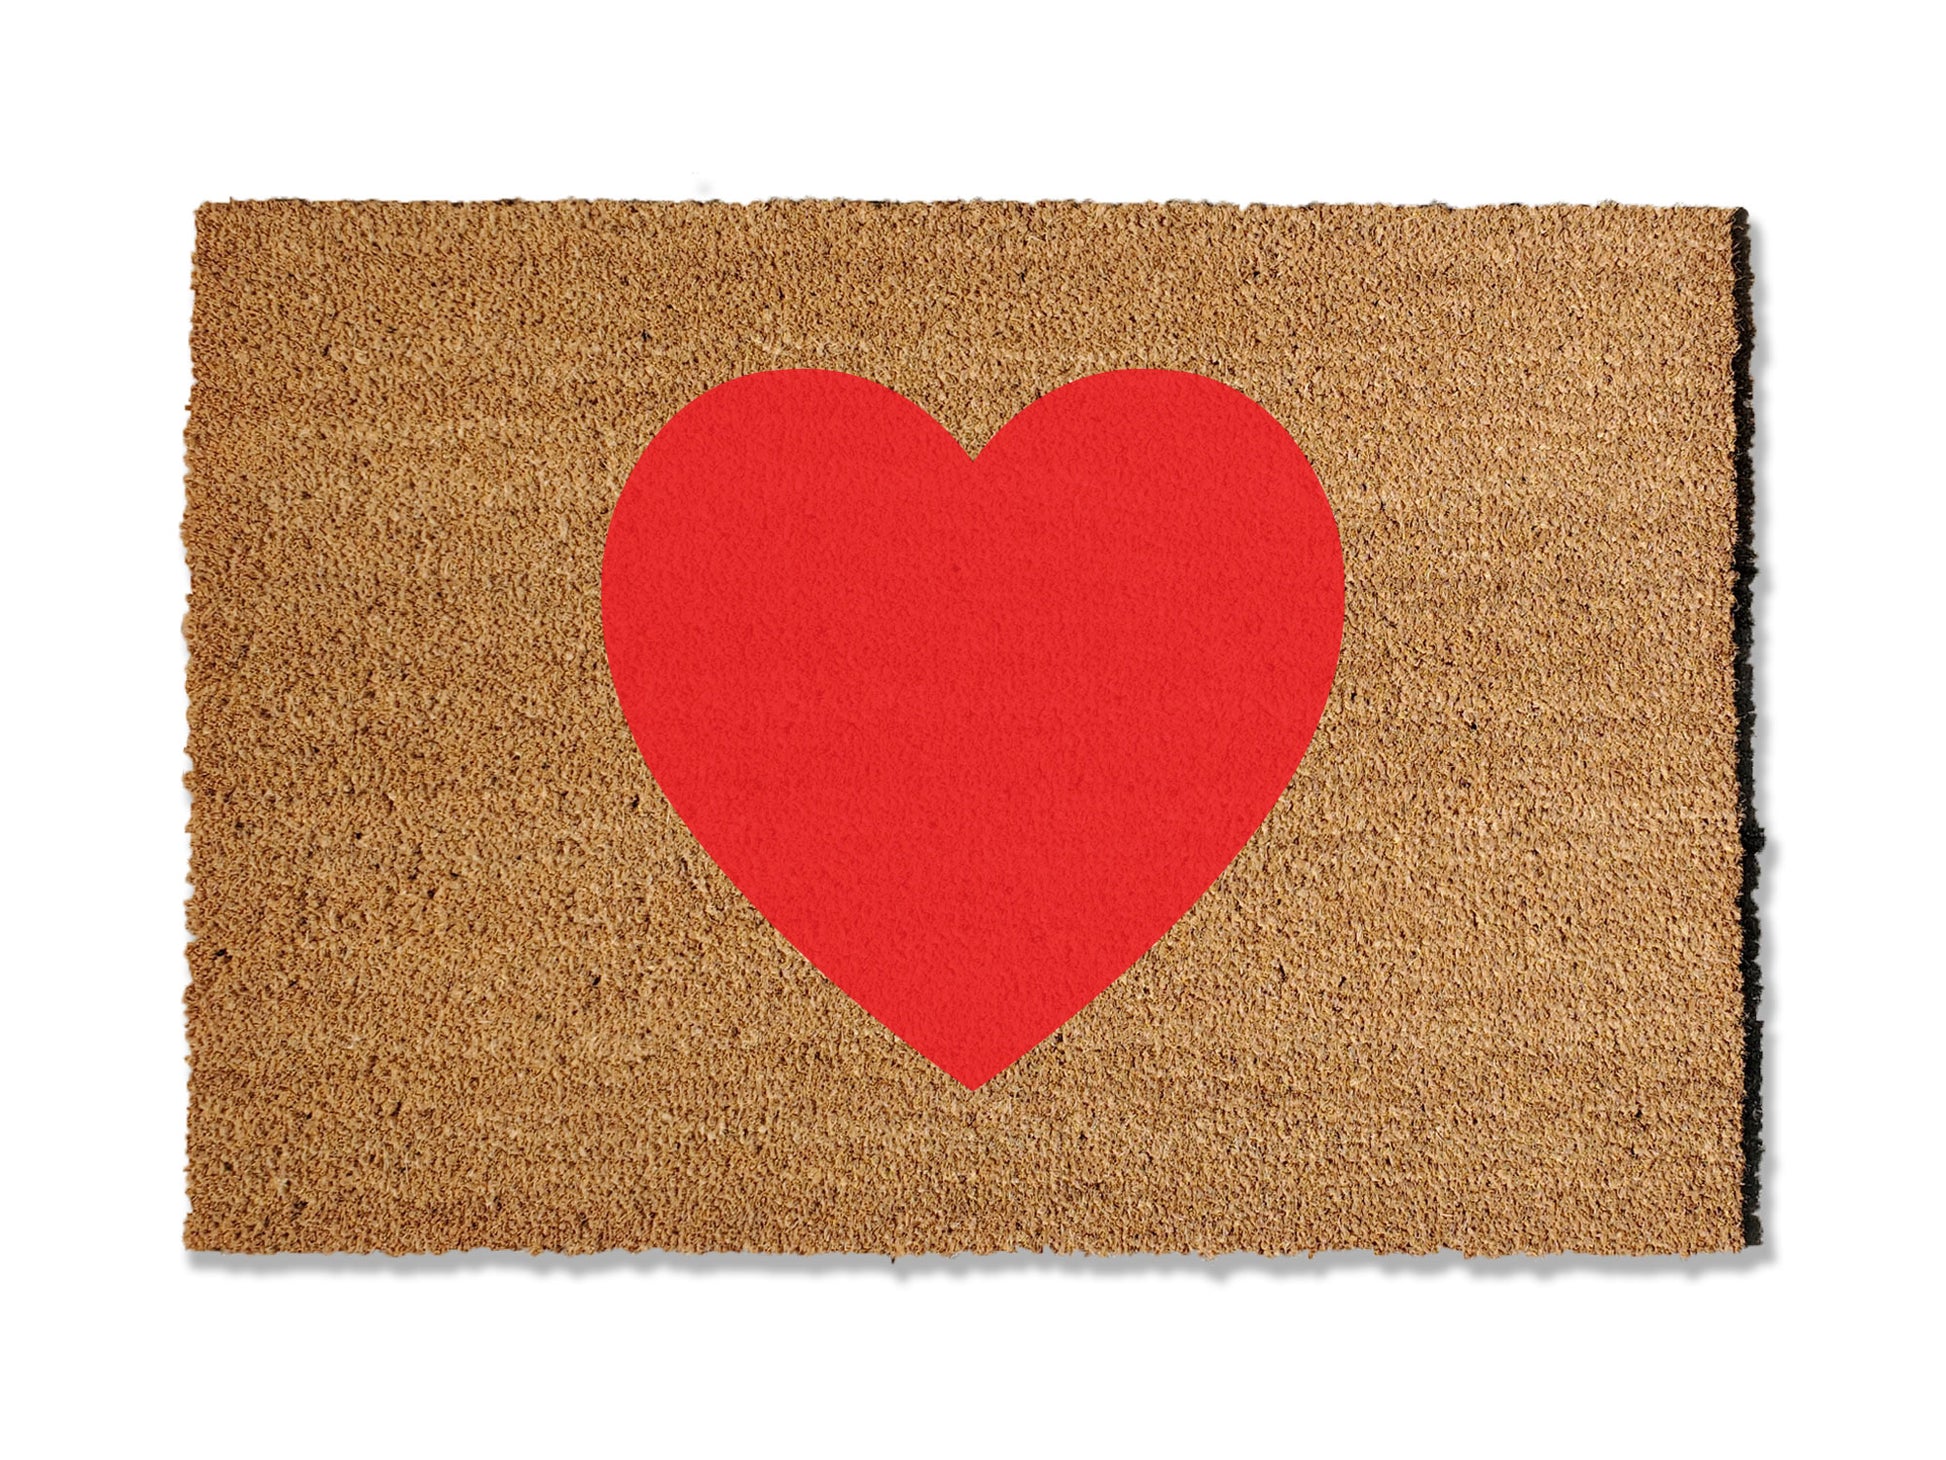 Embrace year-round warmth with our coir doormat featuring a Jumbo heart, available in multiple sizes and colors. Perfect for everyday use and a delightful addition to Valentine's Day, this unique mat is a charming way to spread love and welcome guests with heartwarming style.